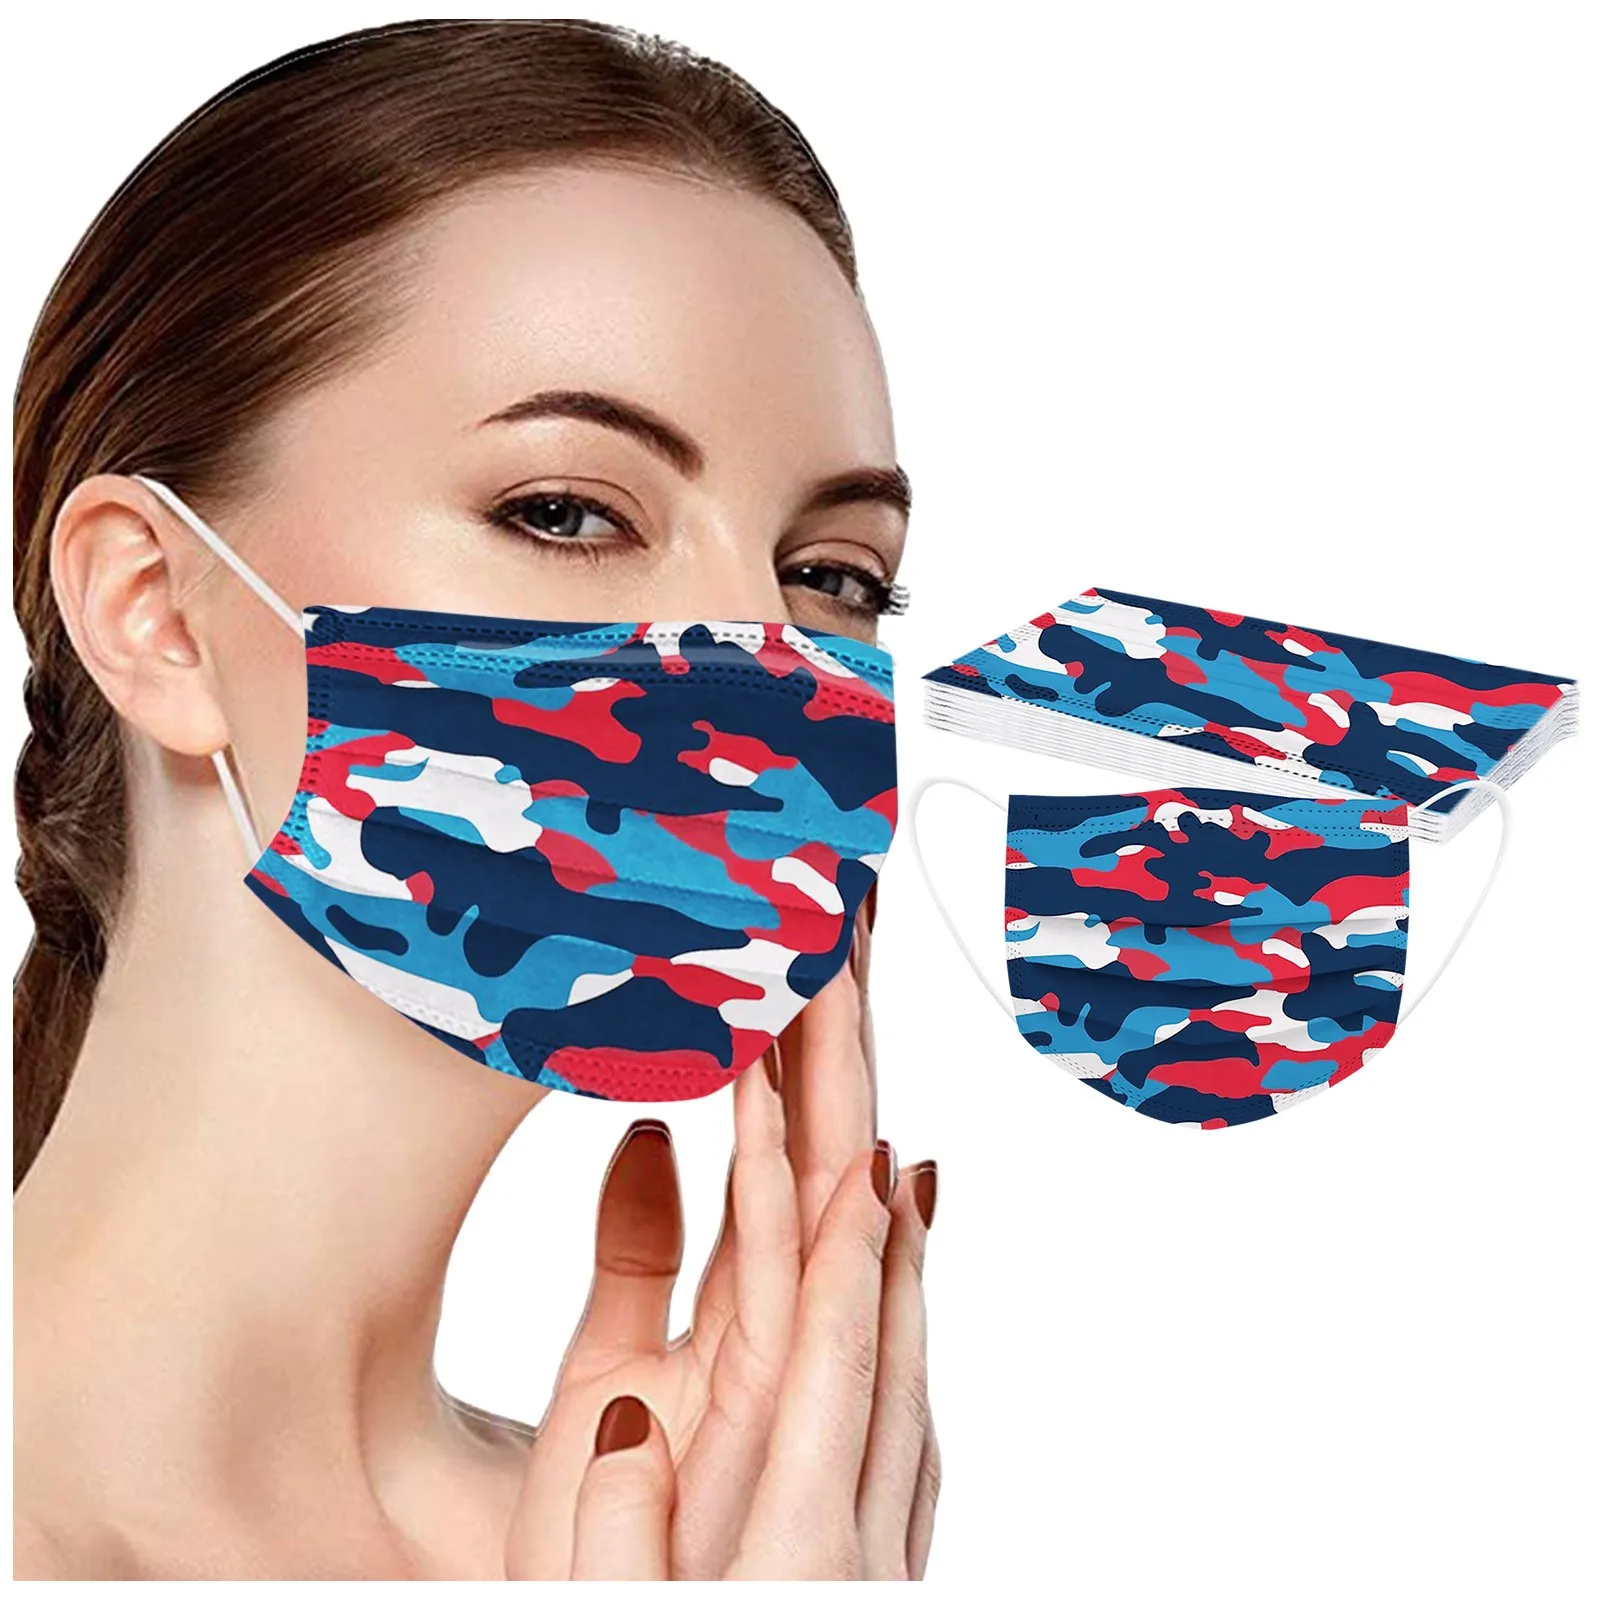 funny mens halloween costumes 50pcs Camouflage Disposable Mask Halloween Cosplay Fashion Printed 3-layer Designer Bandana Mascarillas For Face Cosplay Masque scary halloween costumes